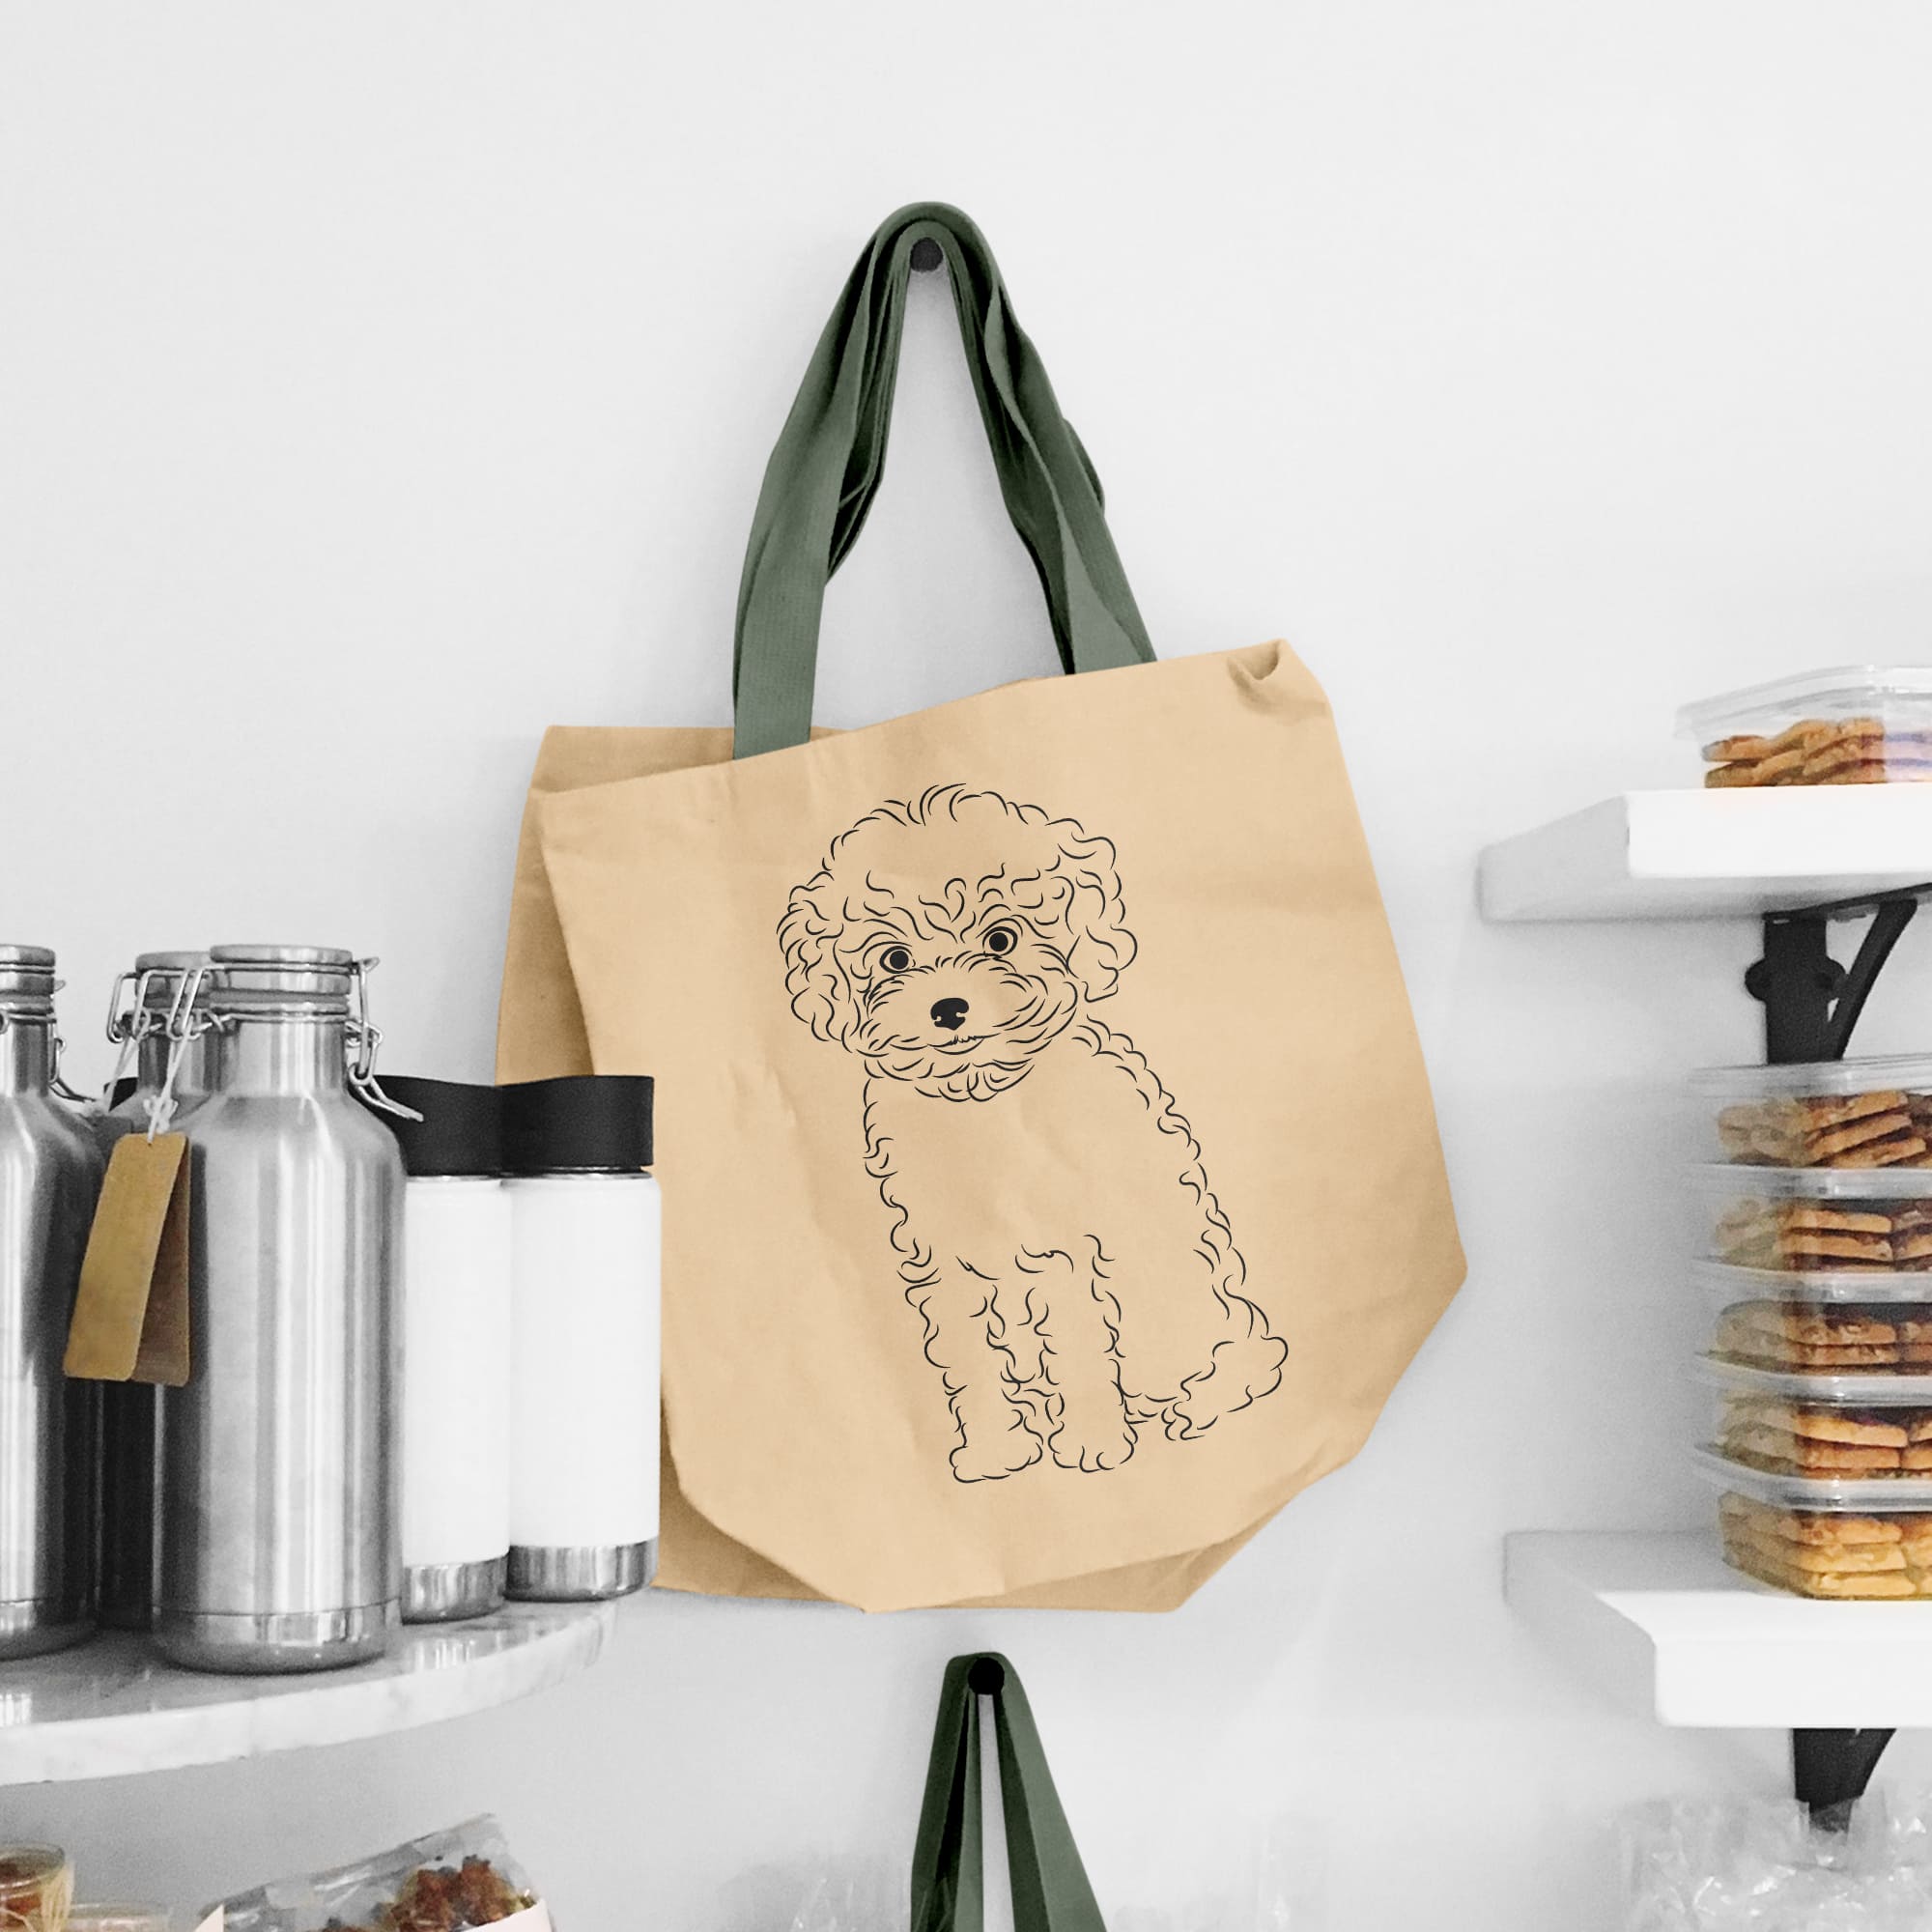 Bag with a dog drawn on it hanging on a wall.